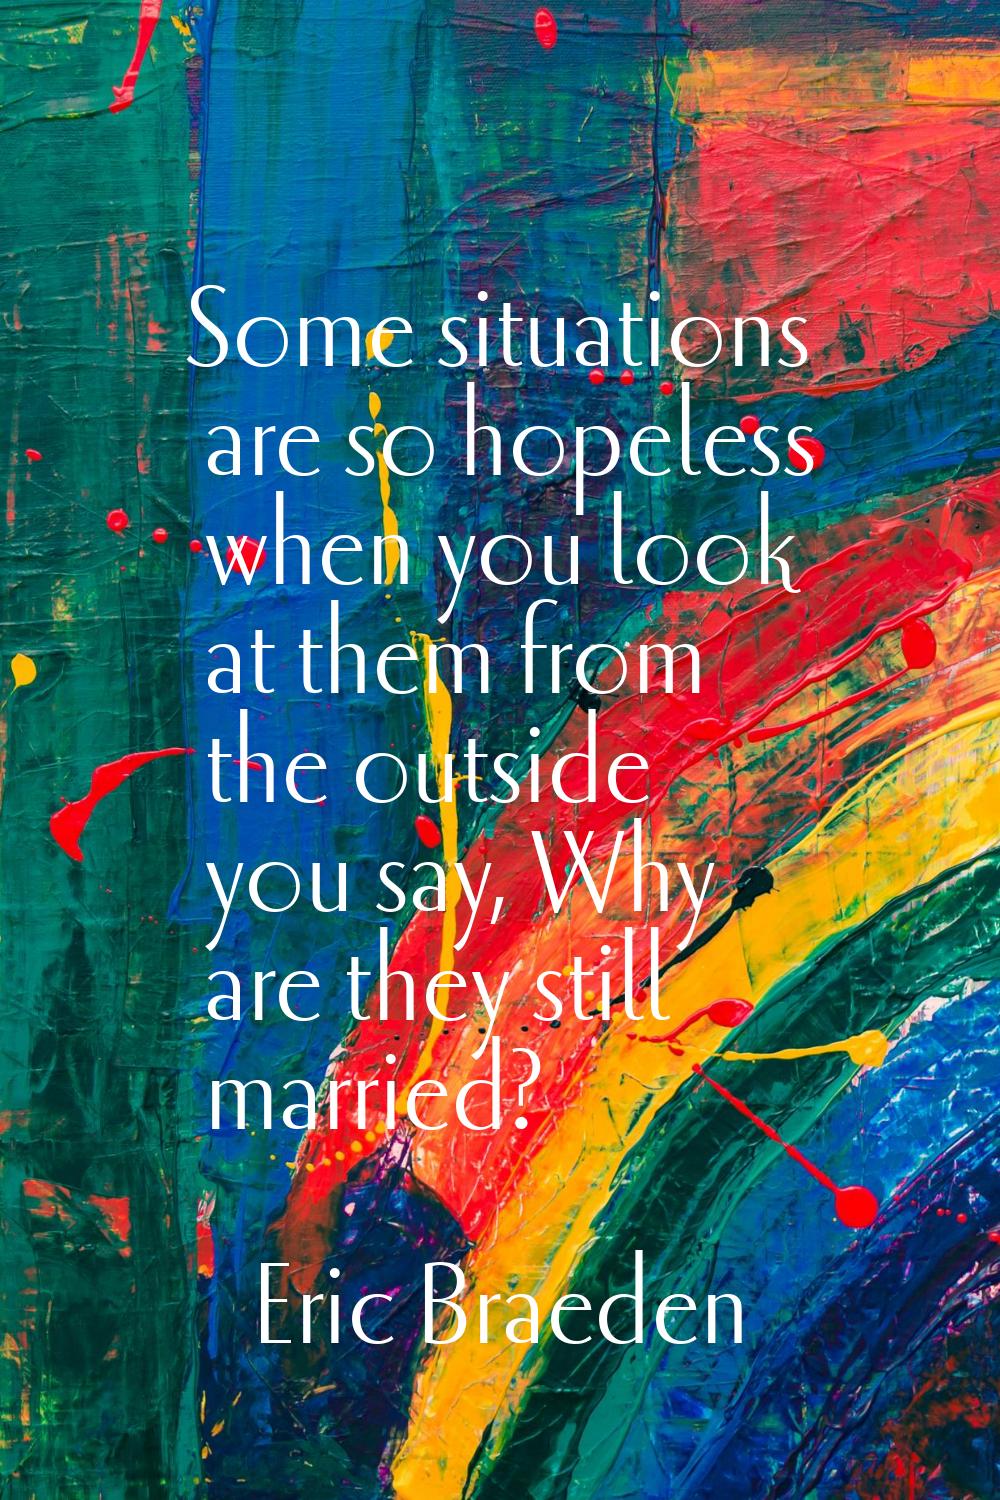 Some situations are so hopeless when you look at them from the outside you say, Why are they still 